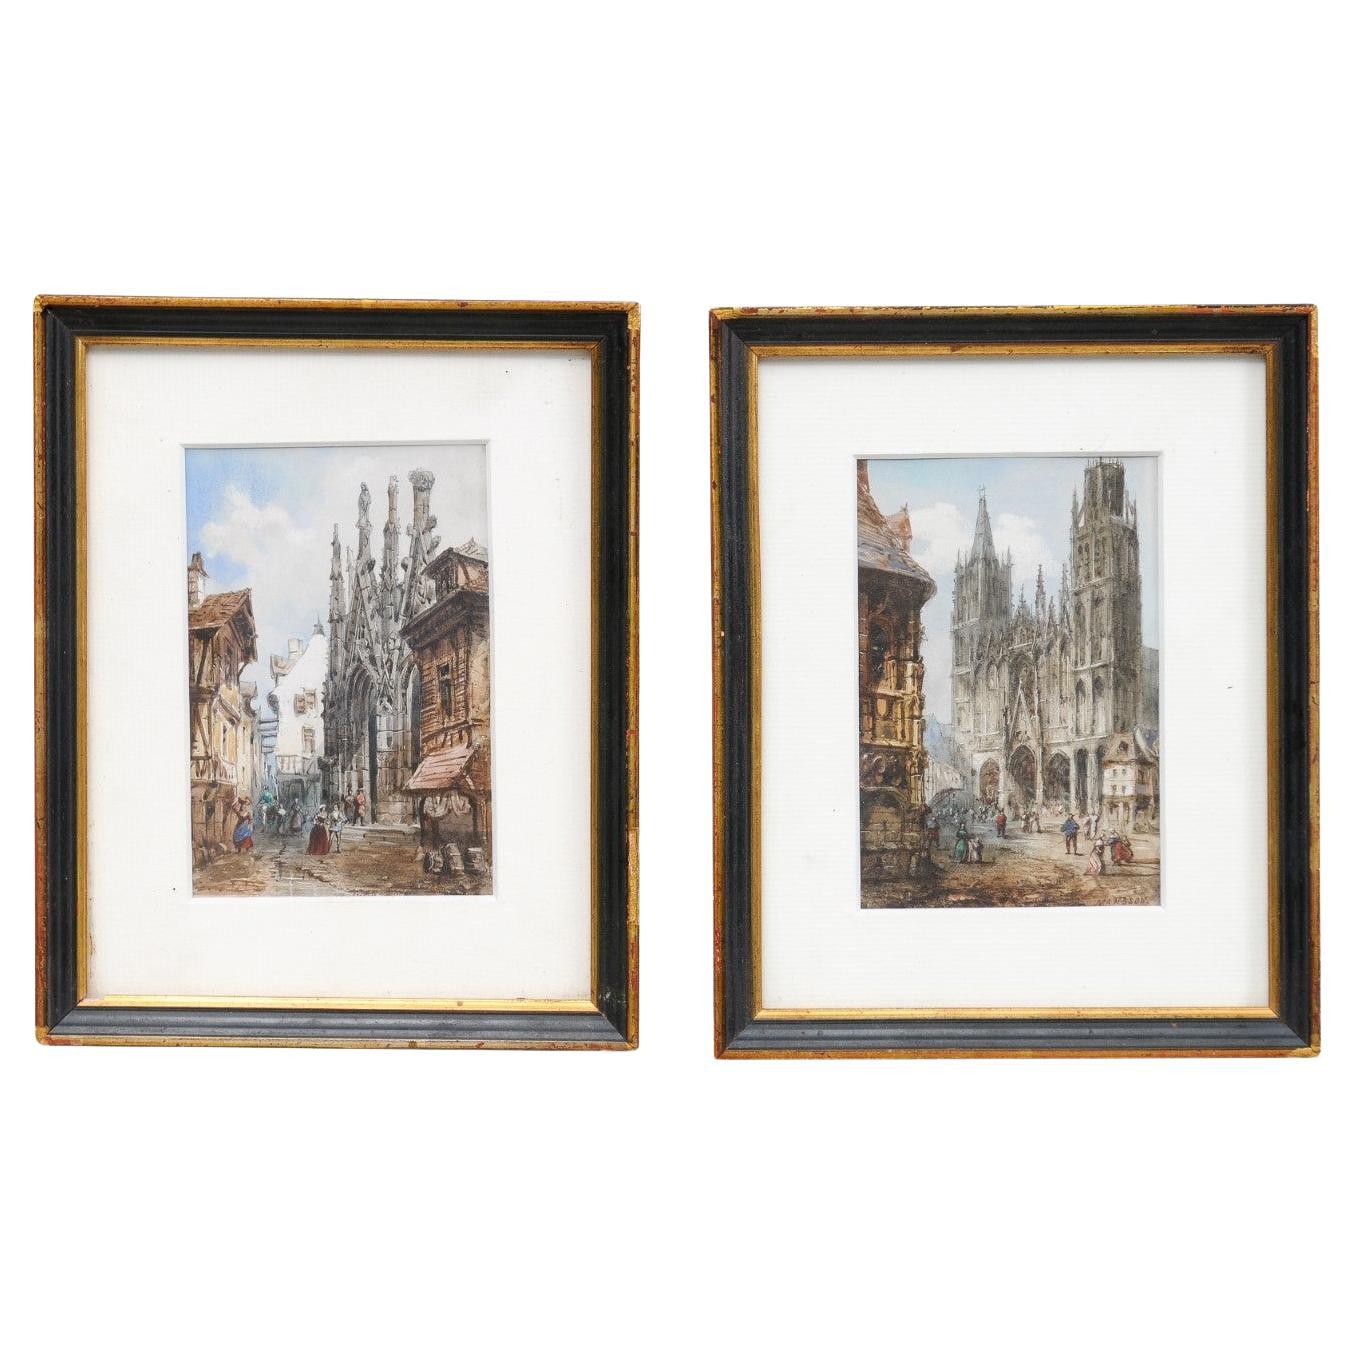 Pair of Framed Watercolors Depicting Gothic Churches by Théodore Henri Mansson